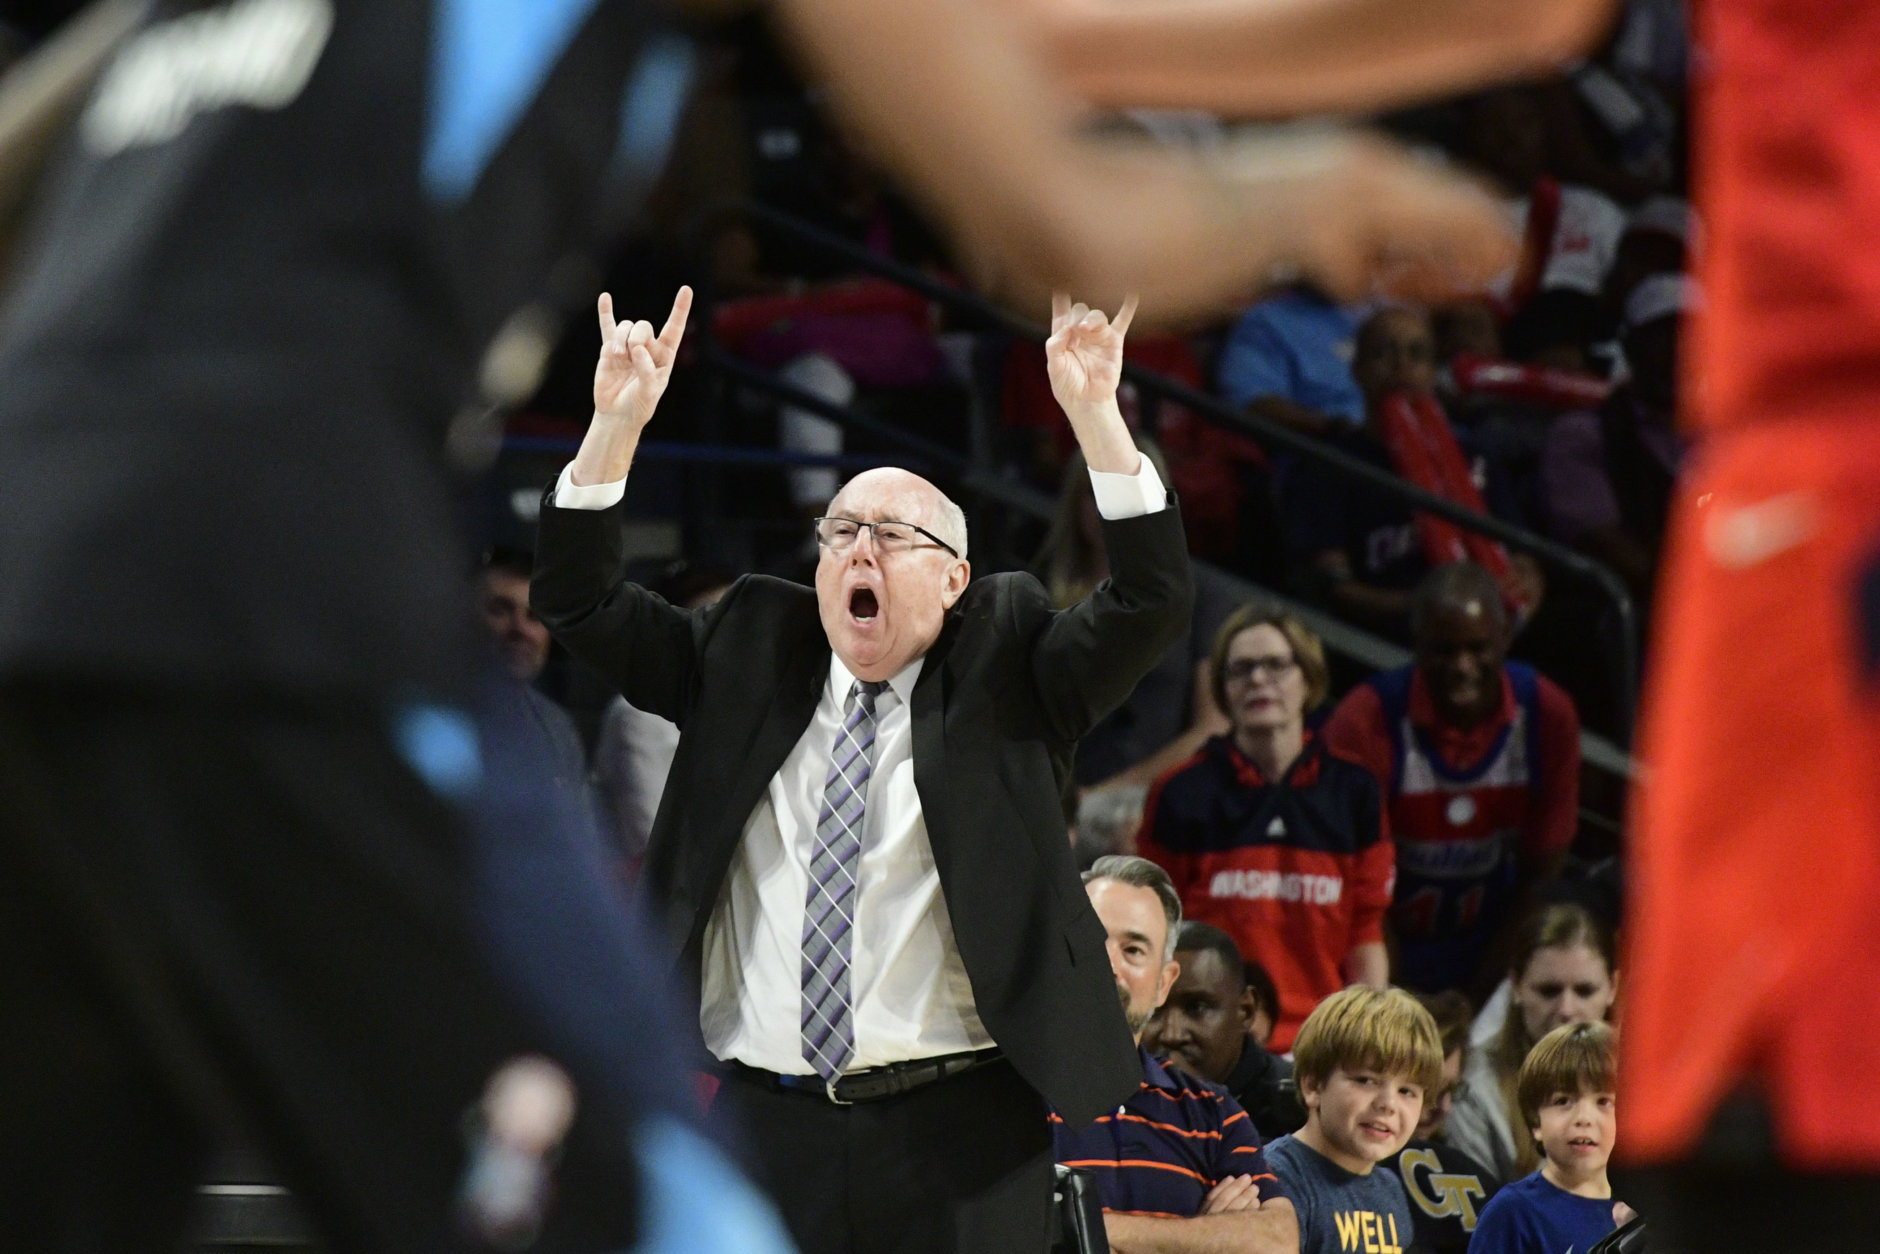 Washington Mystics coach Mike Thibault reacts on the sideline during the second half of Game 5 of a WNBA basketball playoffs semifinal against the Atlanta Dream, Tuesday, Sept. 4, 2018, in Atlanta. The Mystics won 86-81. (AP Photo/John Amis)